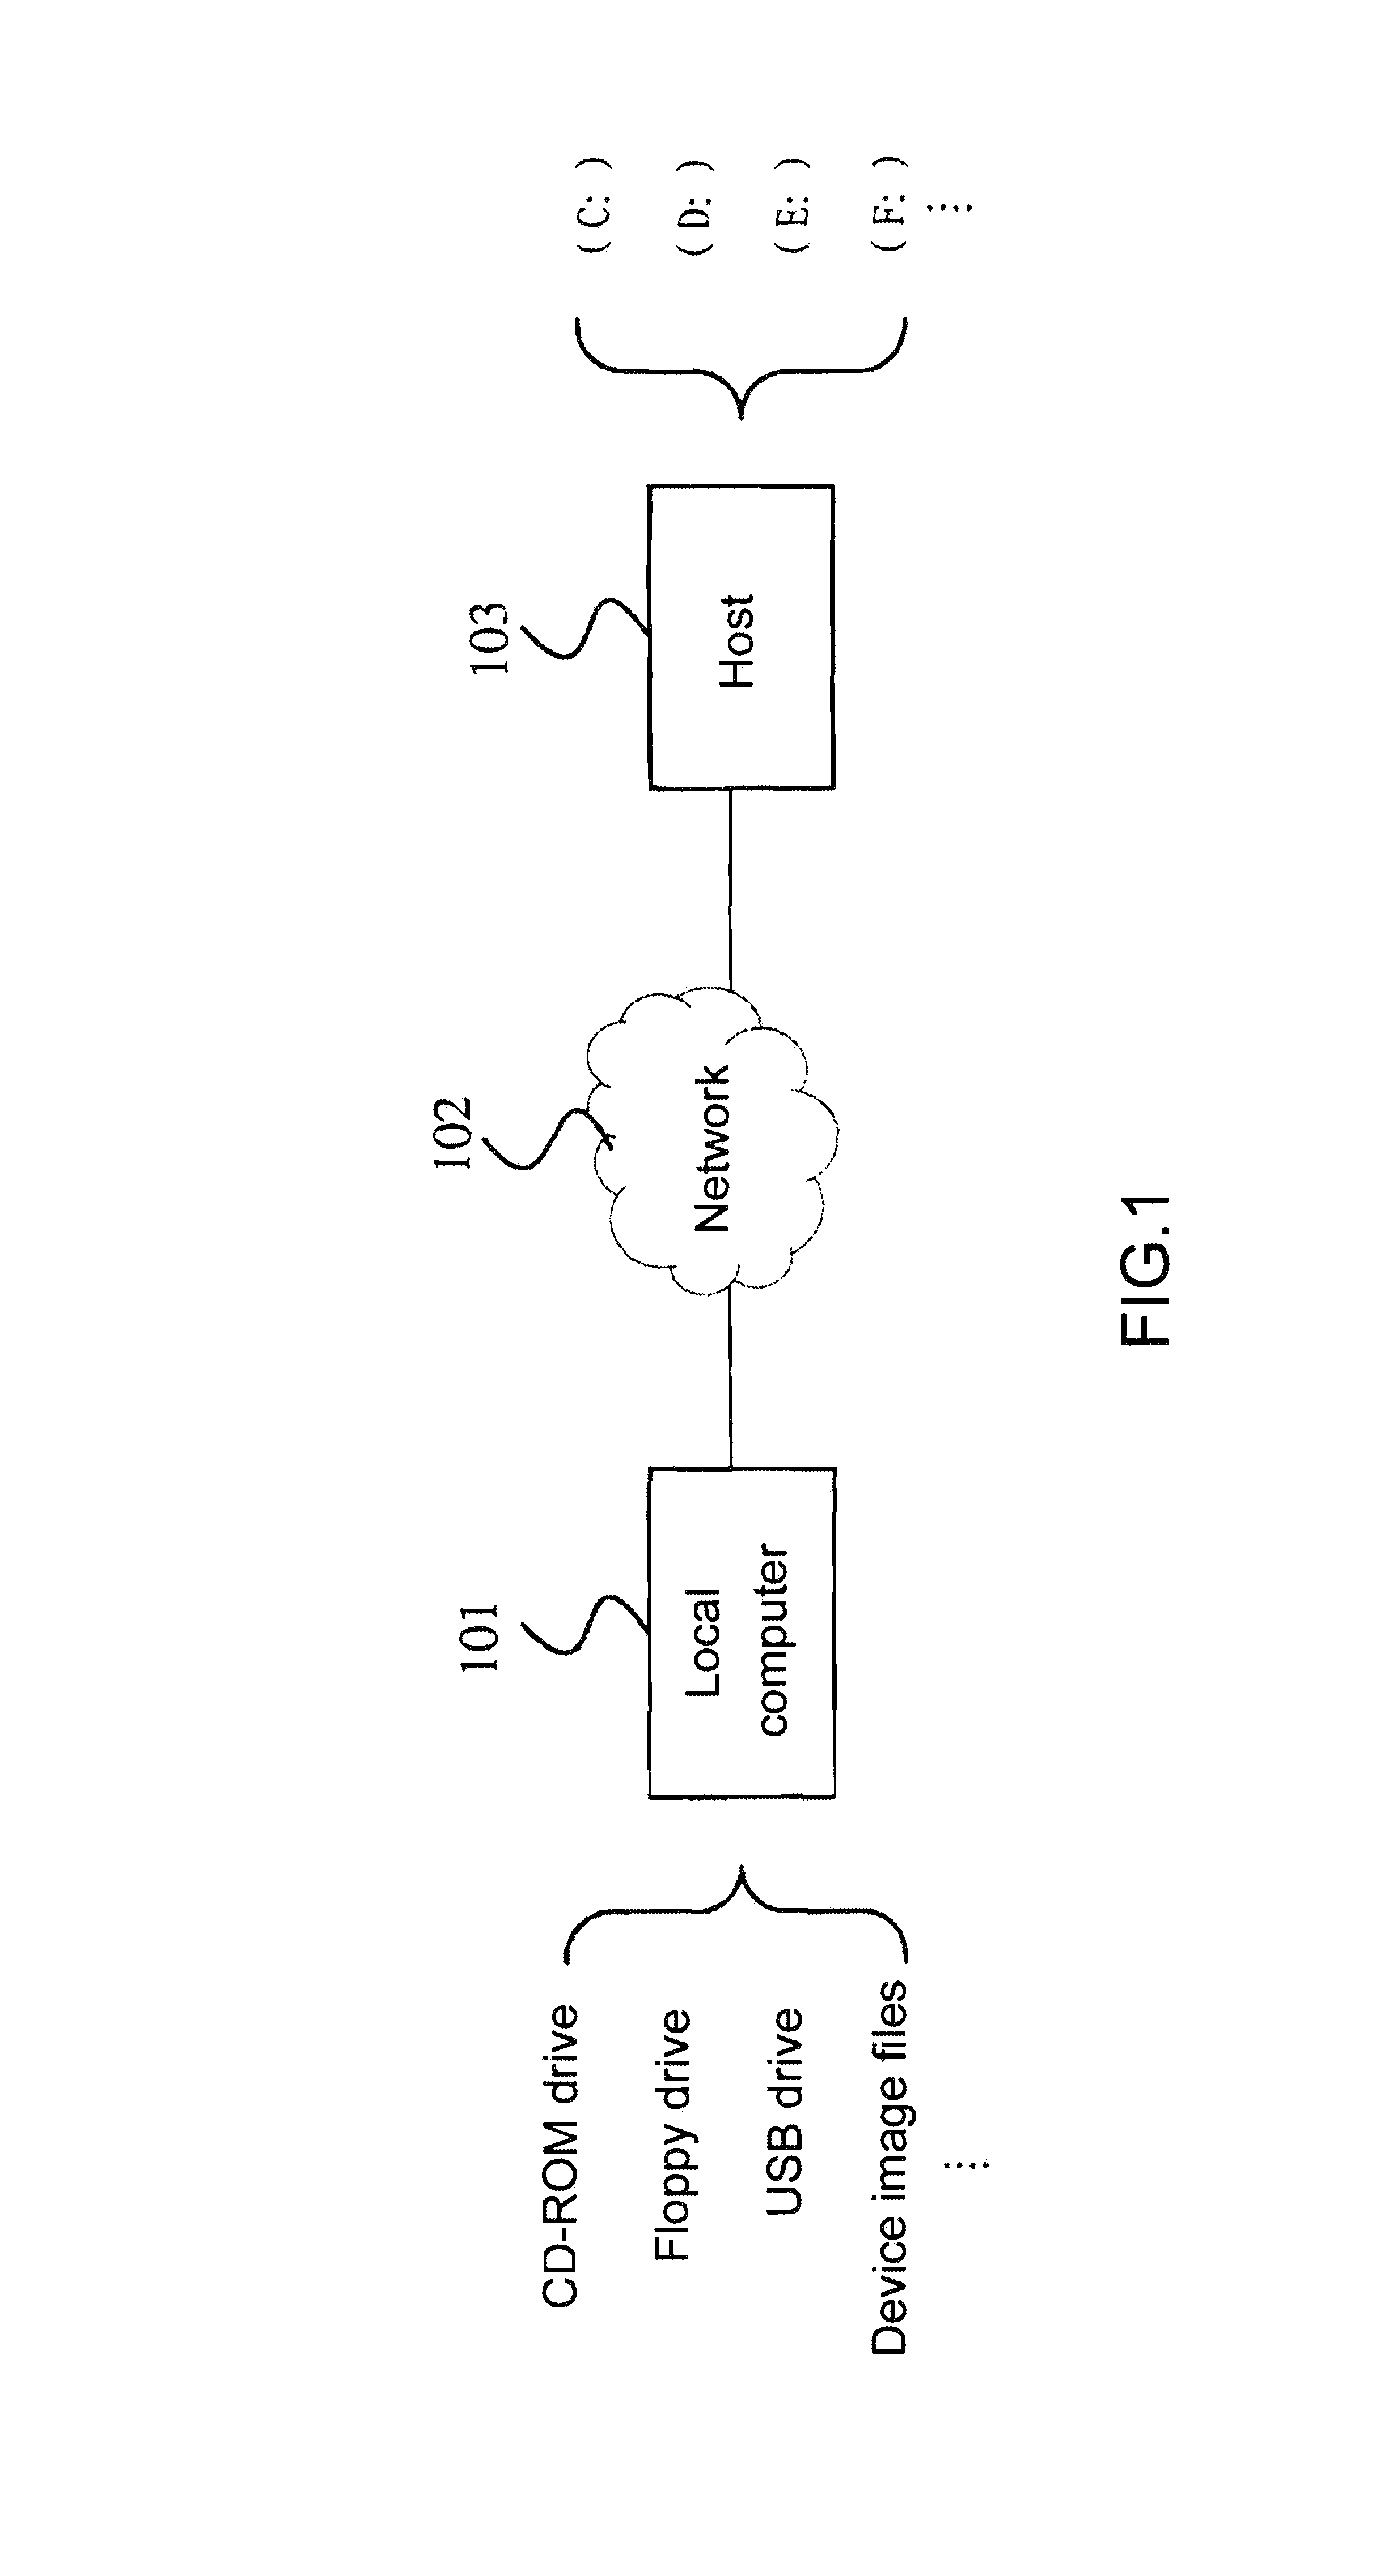 Method and apparatus for mounting files and directories to a local or remote host